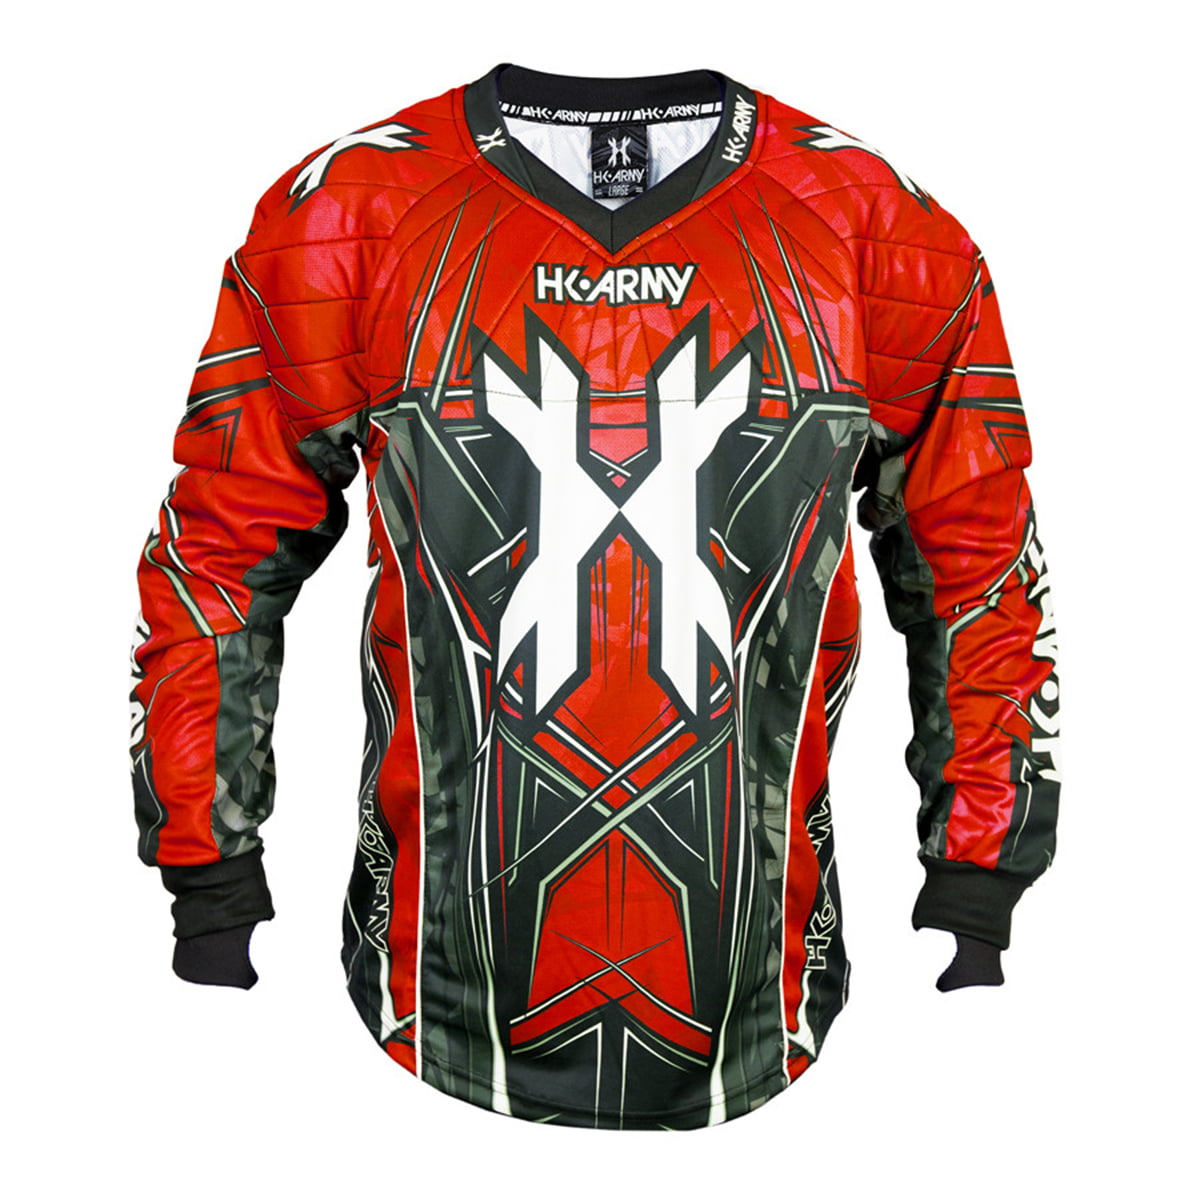 X-Large XL New HK Army Paintball HSTL Line Playing Jersey Red 